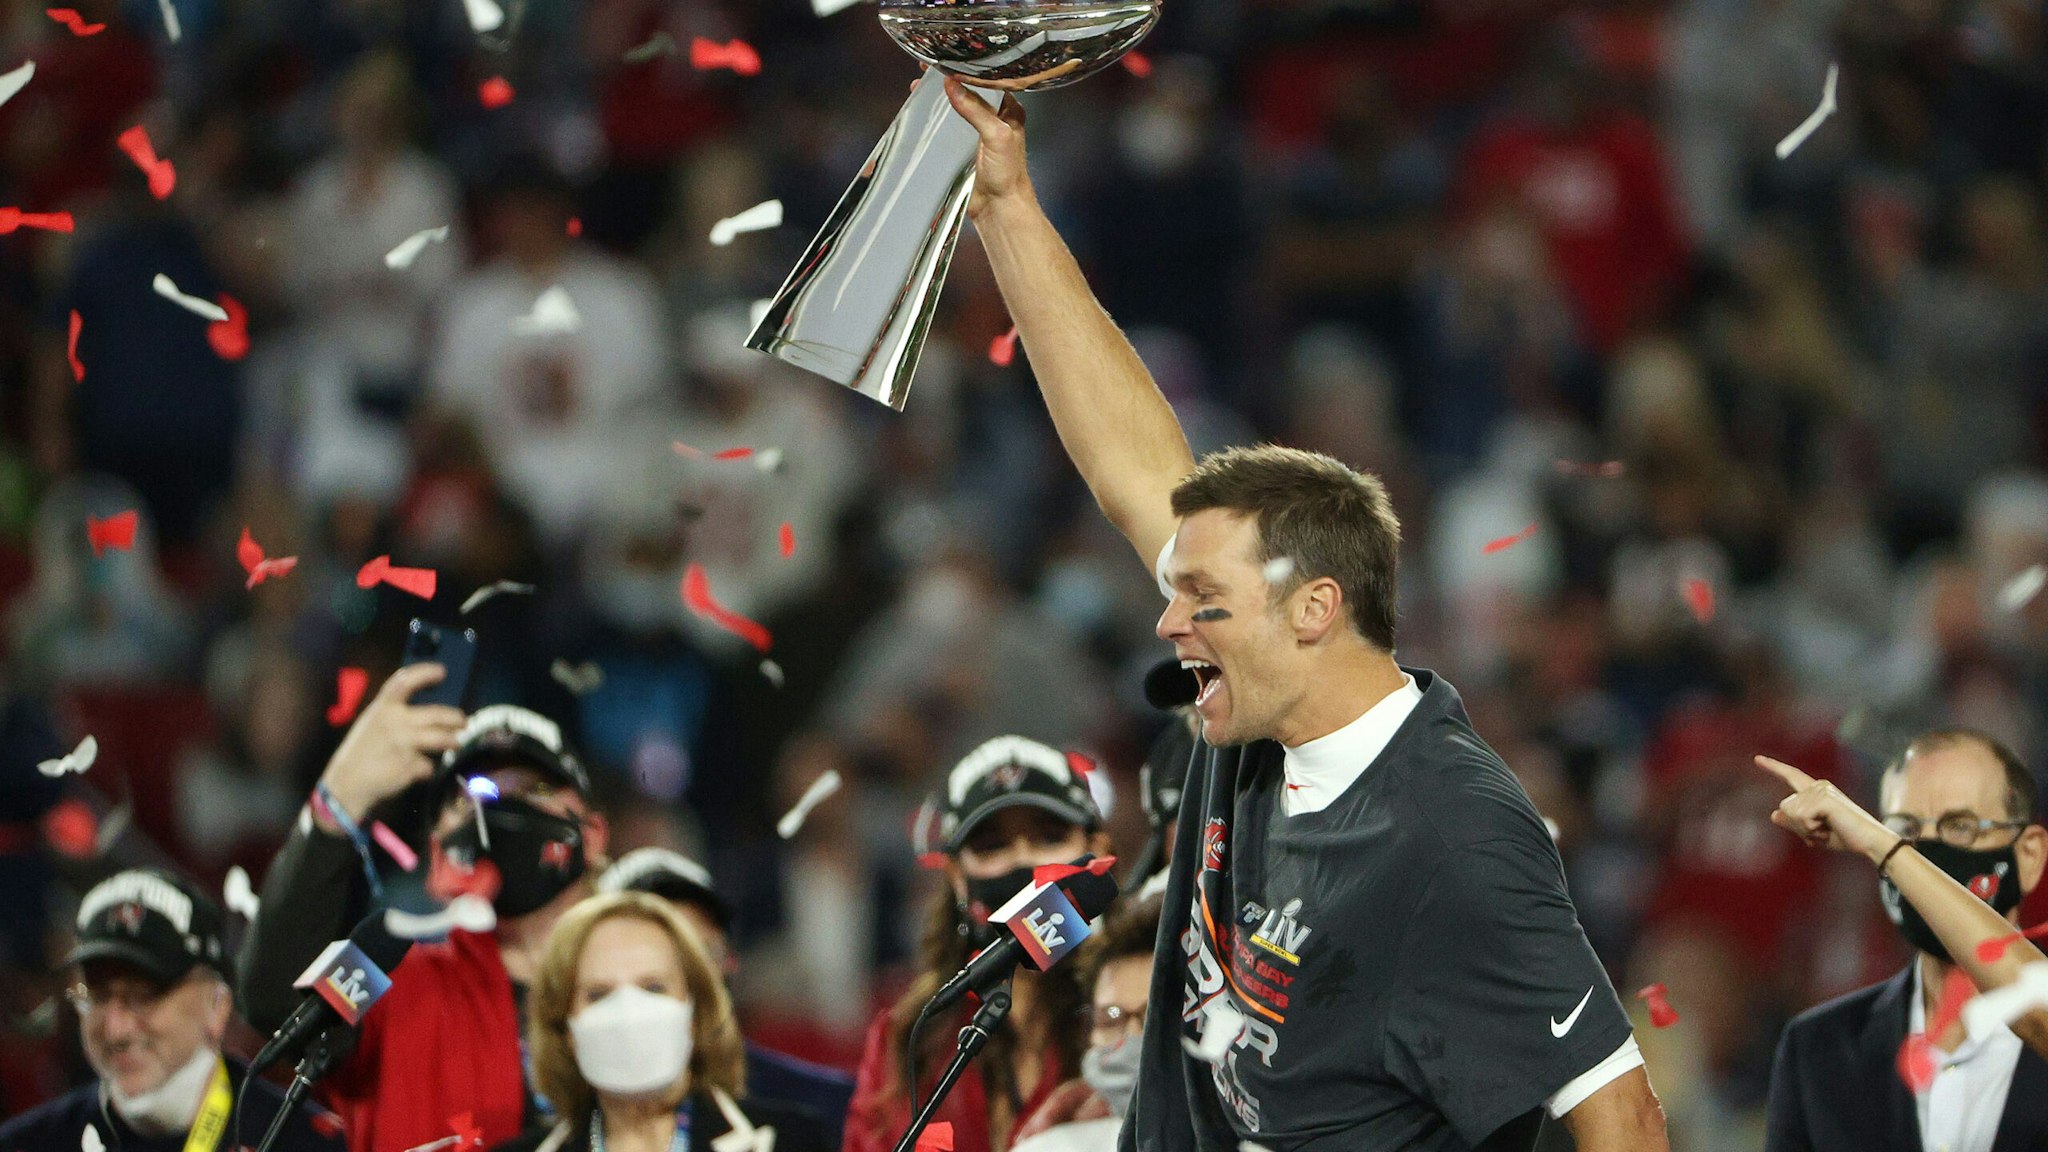 TAMPA, FLORIDA - FEBRUARY 07: Tom Brady #12 of the Tampa Bay Buccaneers celebrates with the Lombardi Trophy after defeating the Kansas City Chiefs in Super Bowl LV at Raymond James Stadium on February 07, 2021 in Tampa, Florida. The Buccaneers defeated the Chiefs 31-9.